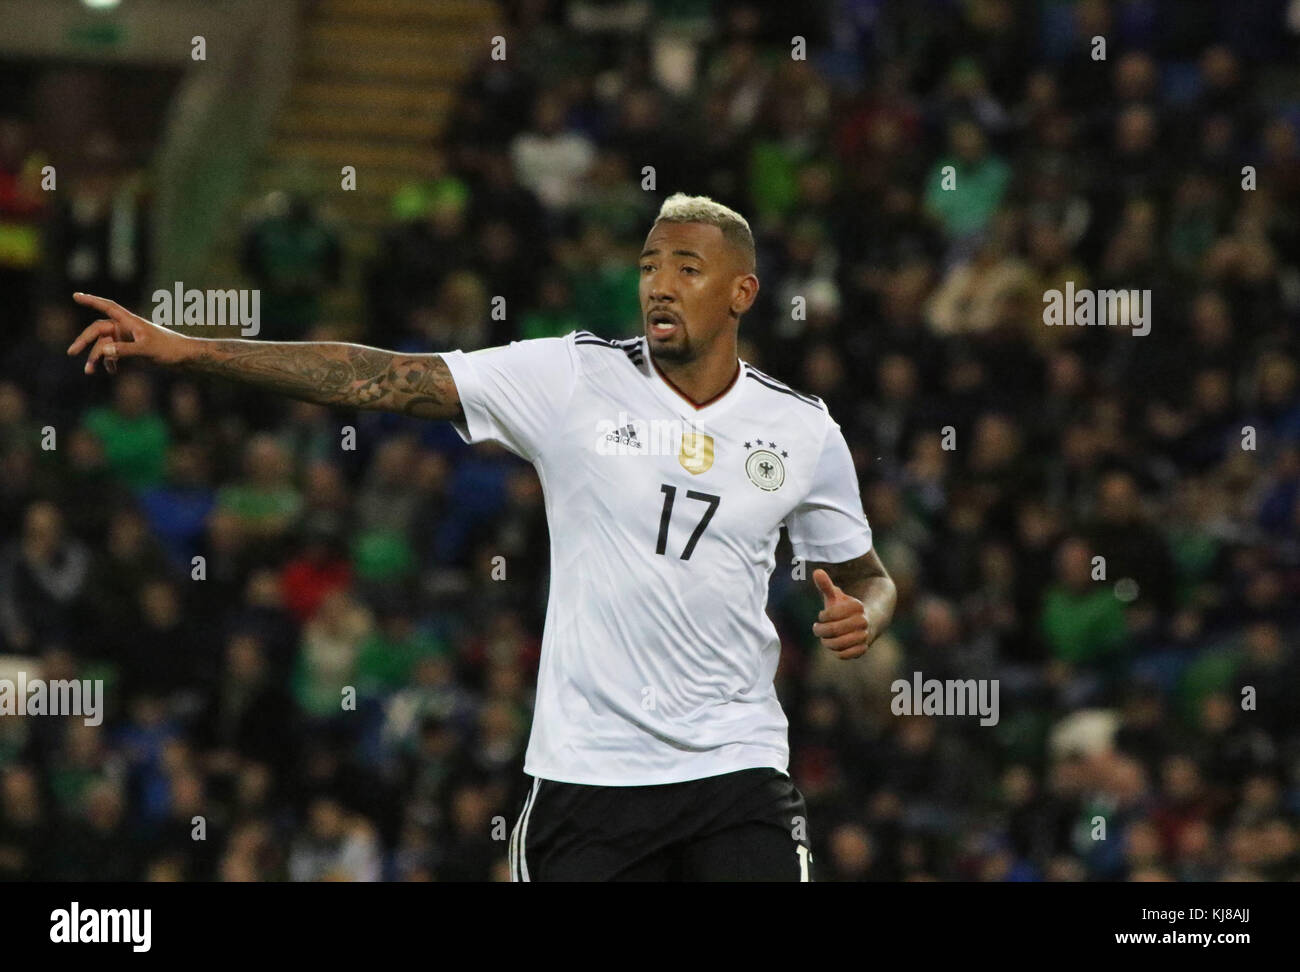 Germany's Jerome Boateng (17) in action against Northern Ireland at Windsor Park in Belfast 05 October 2017. Stock Photo